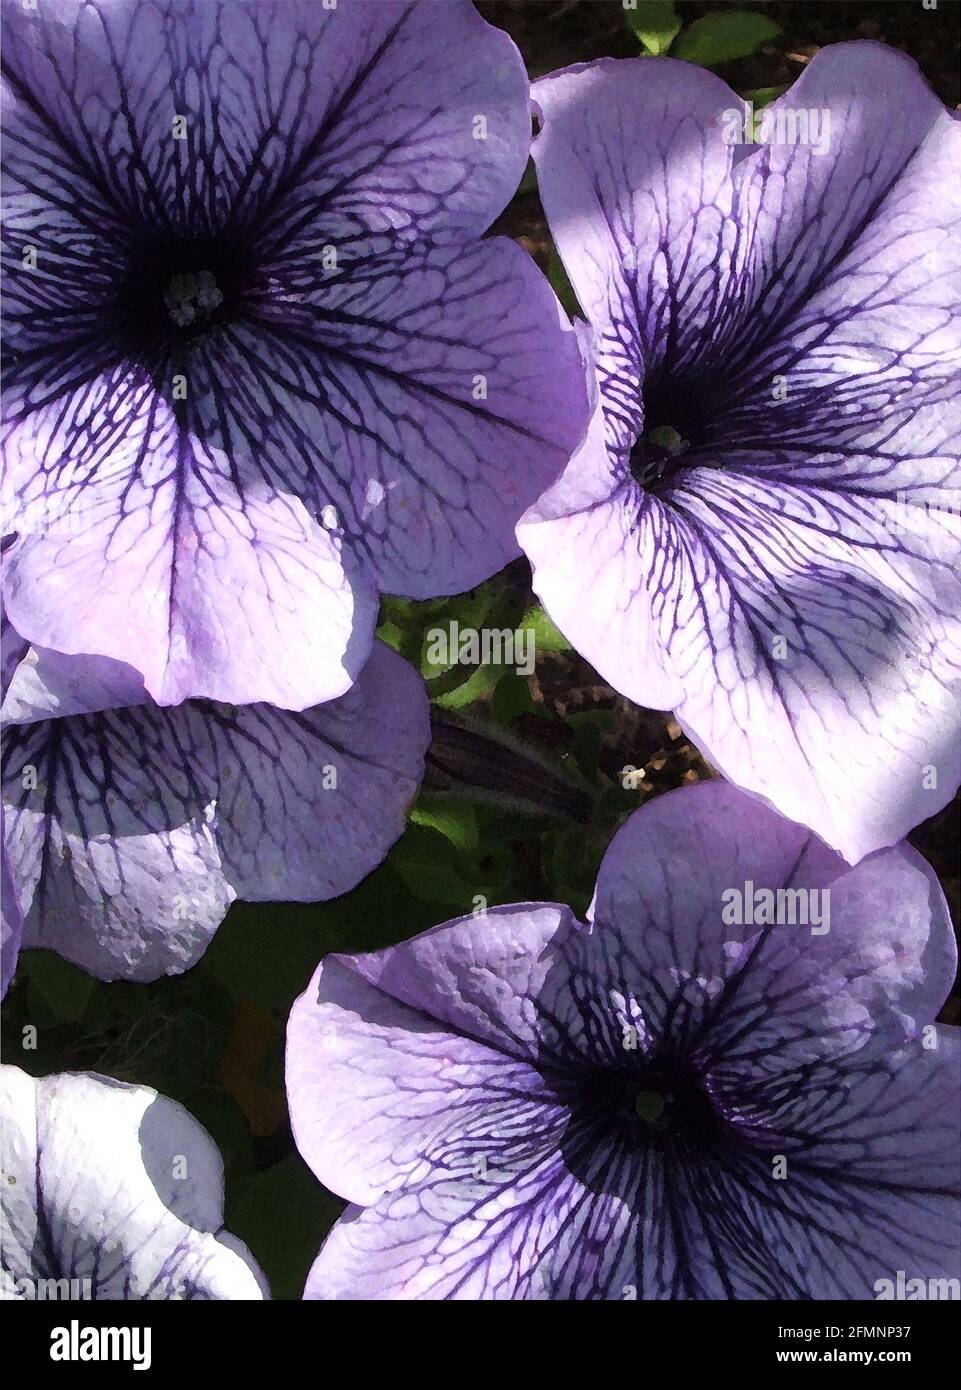 Petunia (Petunia 'Daddy Series') One of Forty-two Iconic Images of English Garden Flowers, Wildflowers and Rural Landscapes. Stock Photo